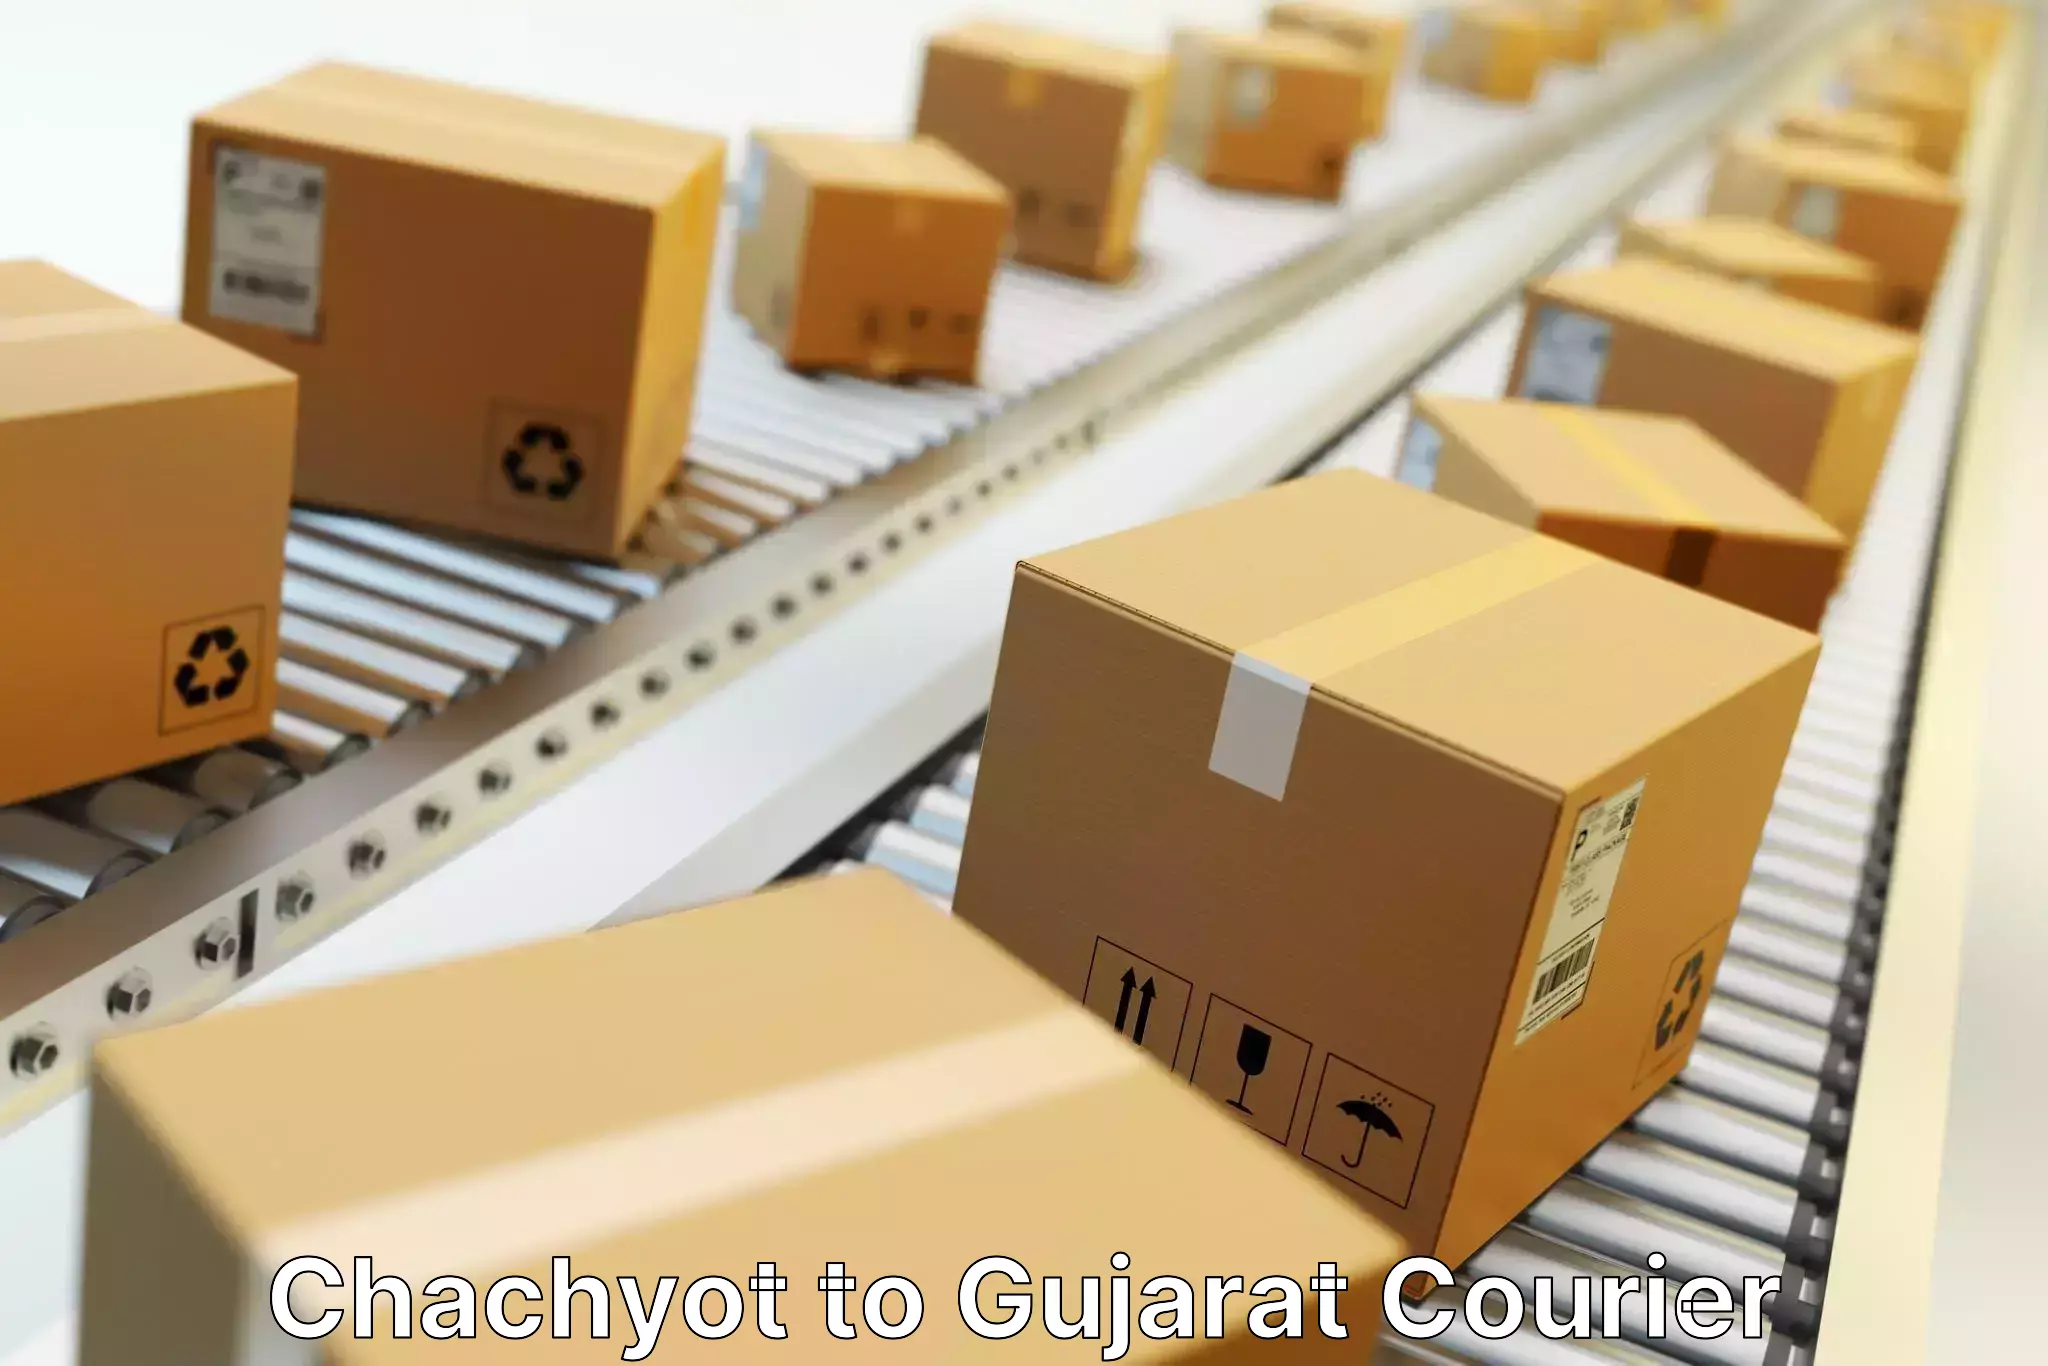 High-speed parcel service Chachyot to Madhavpur